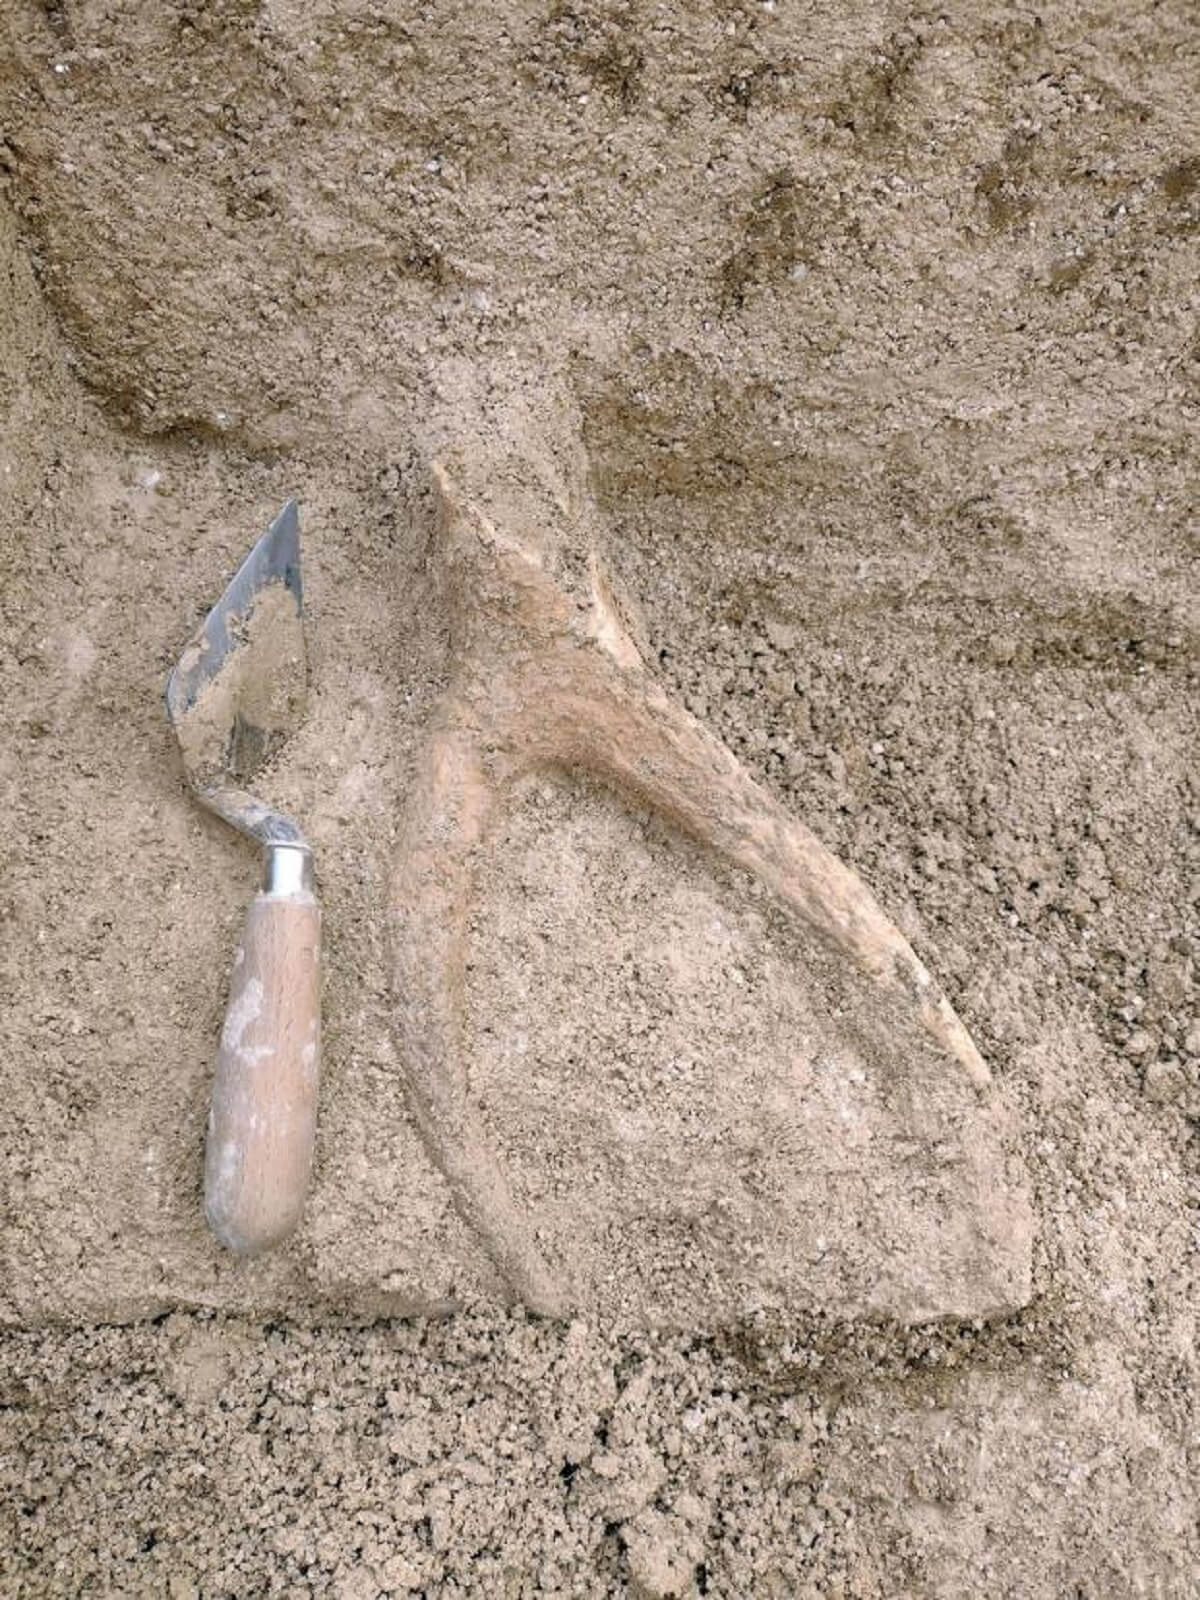 picture of digging utensil and a large deer antler fossil